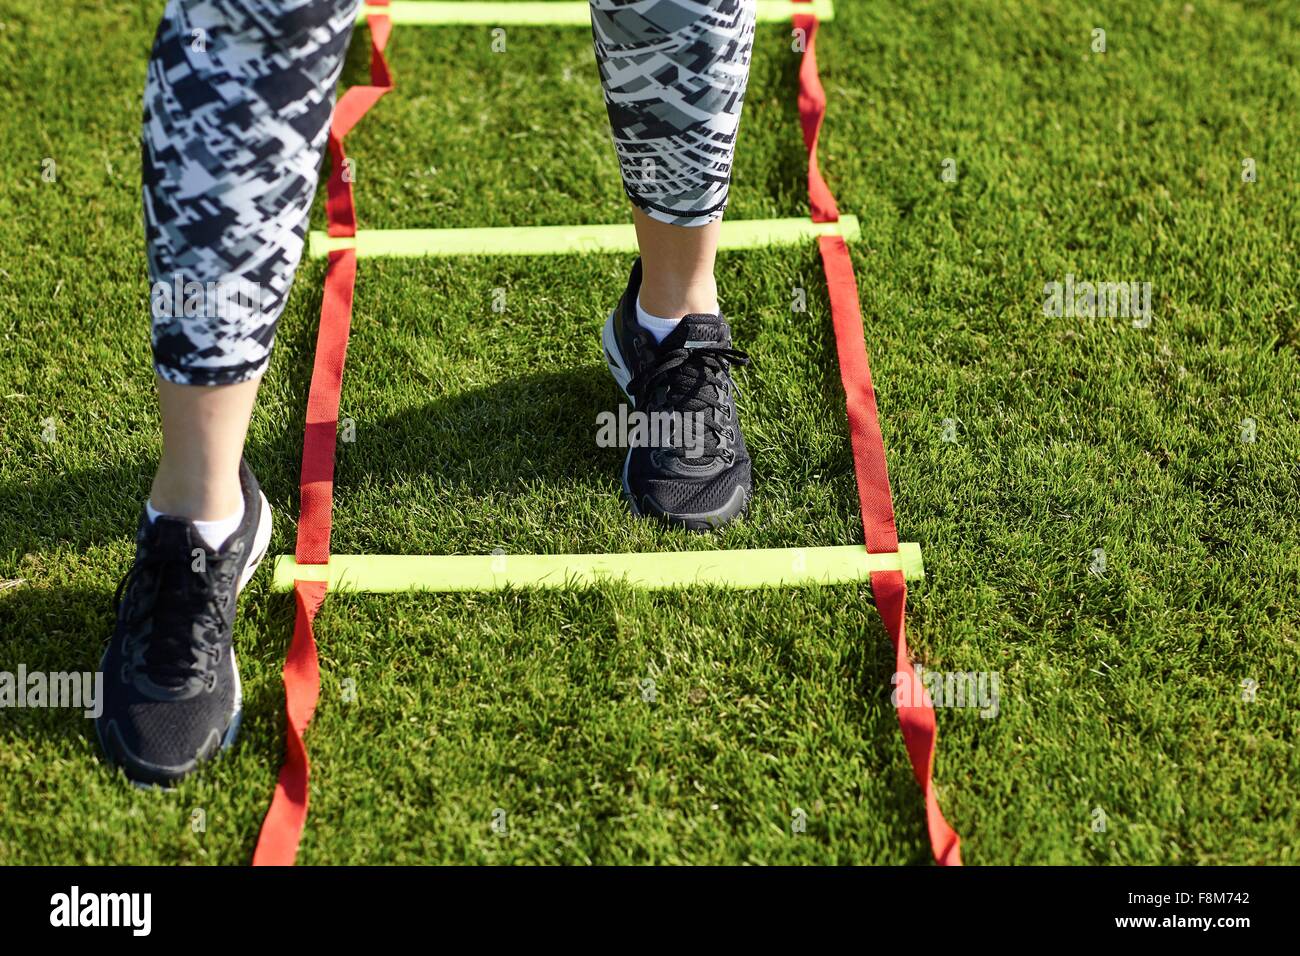 Feet of young woman training on agility ladder Stock Photo